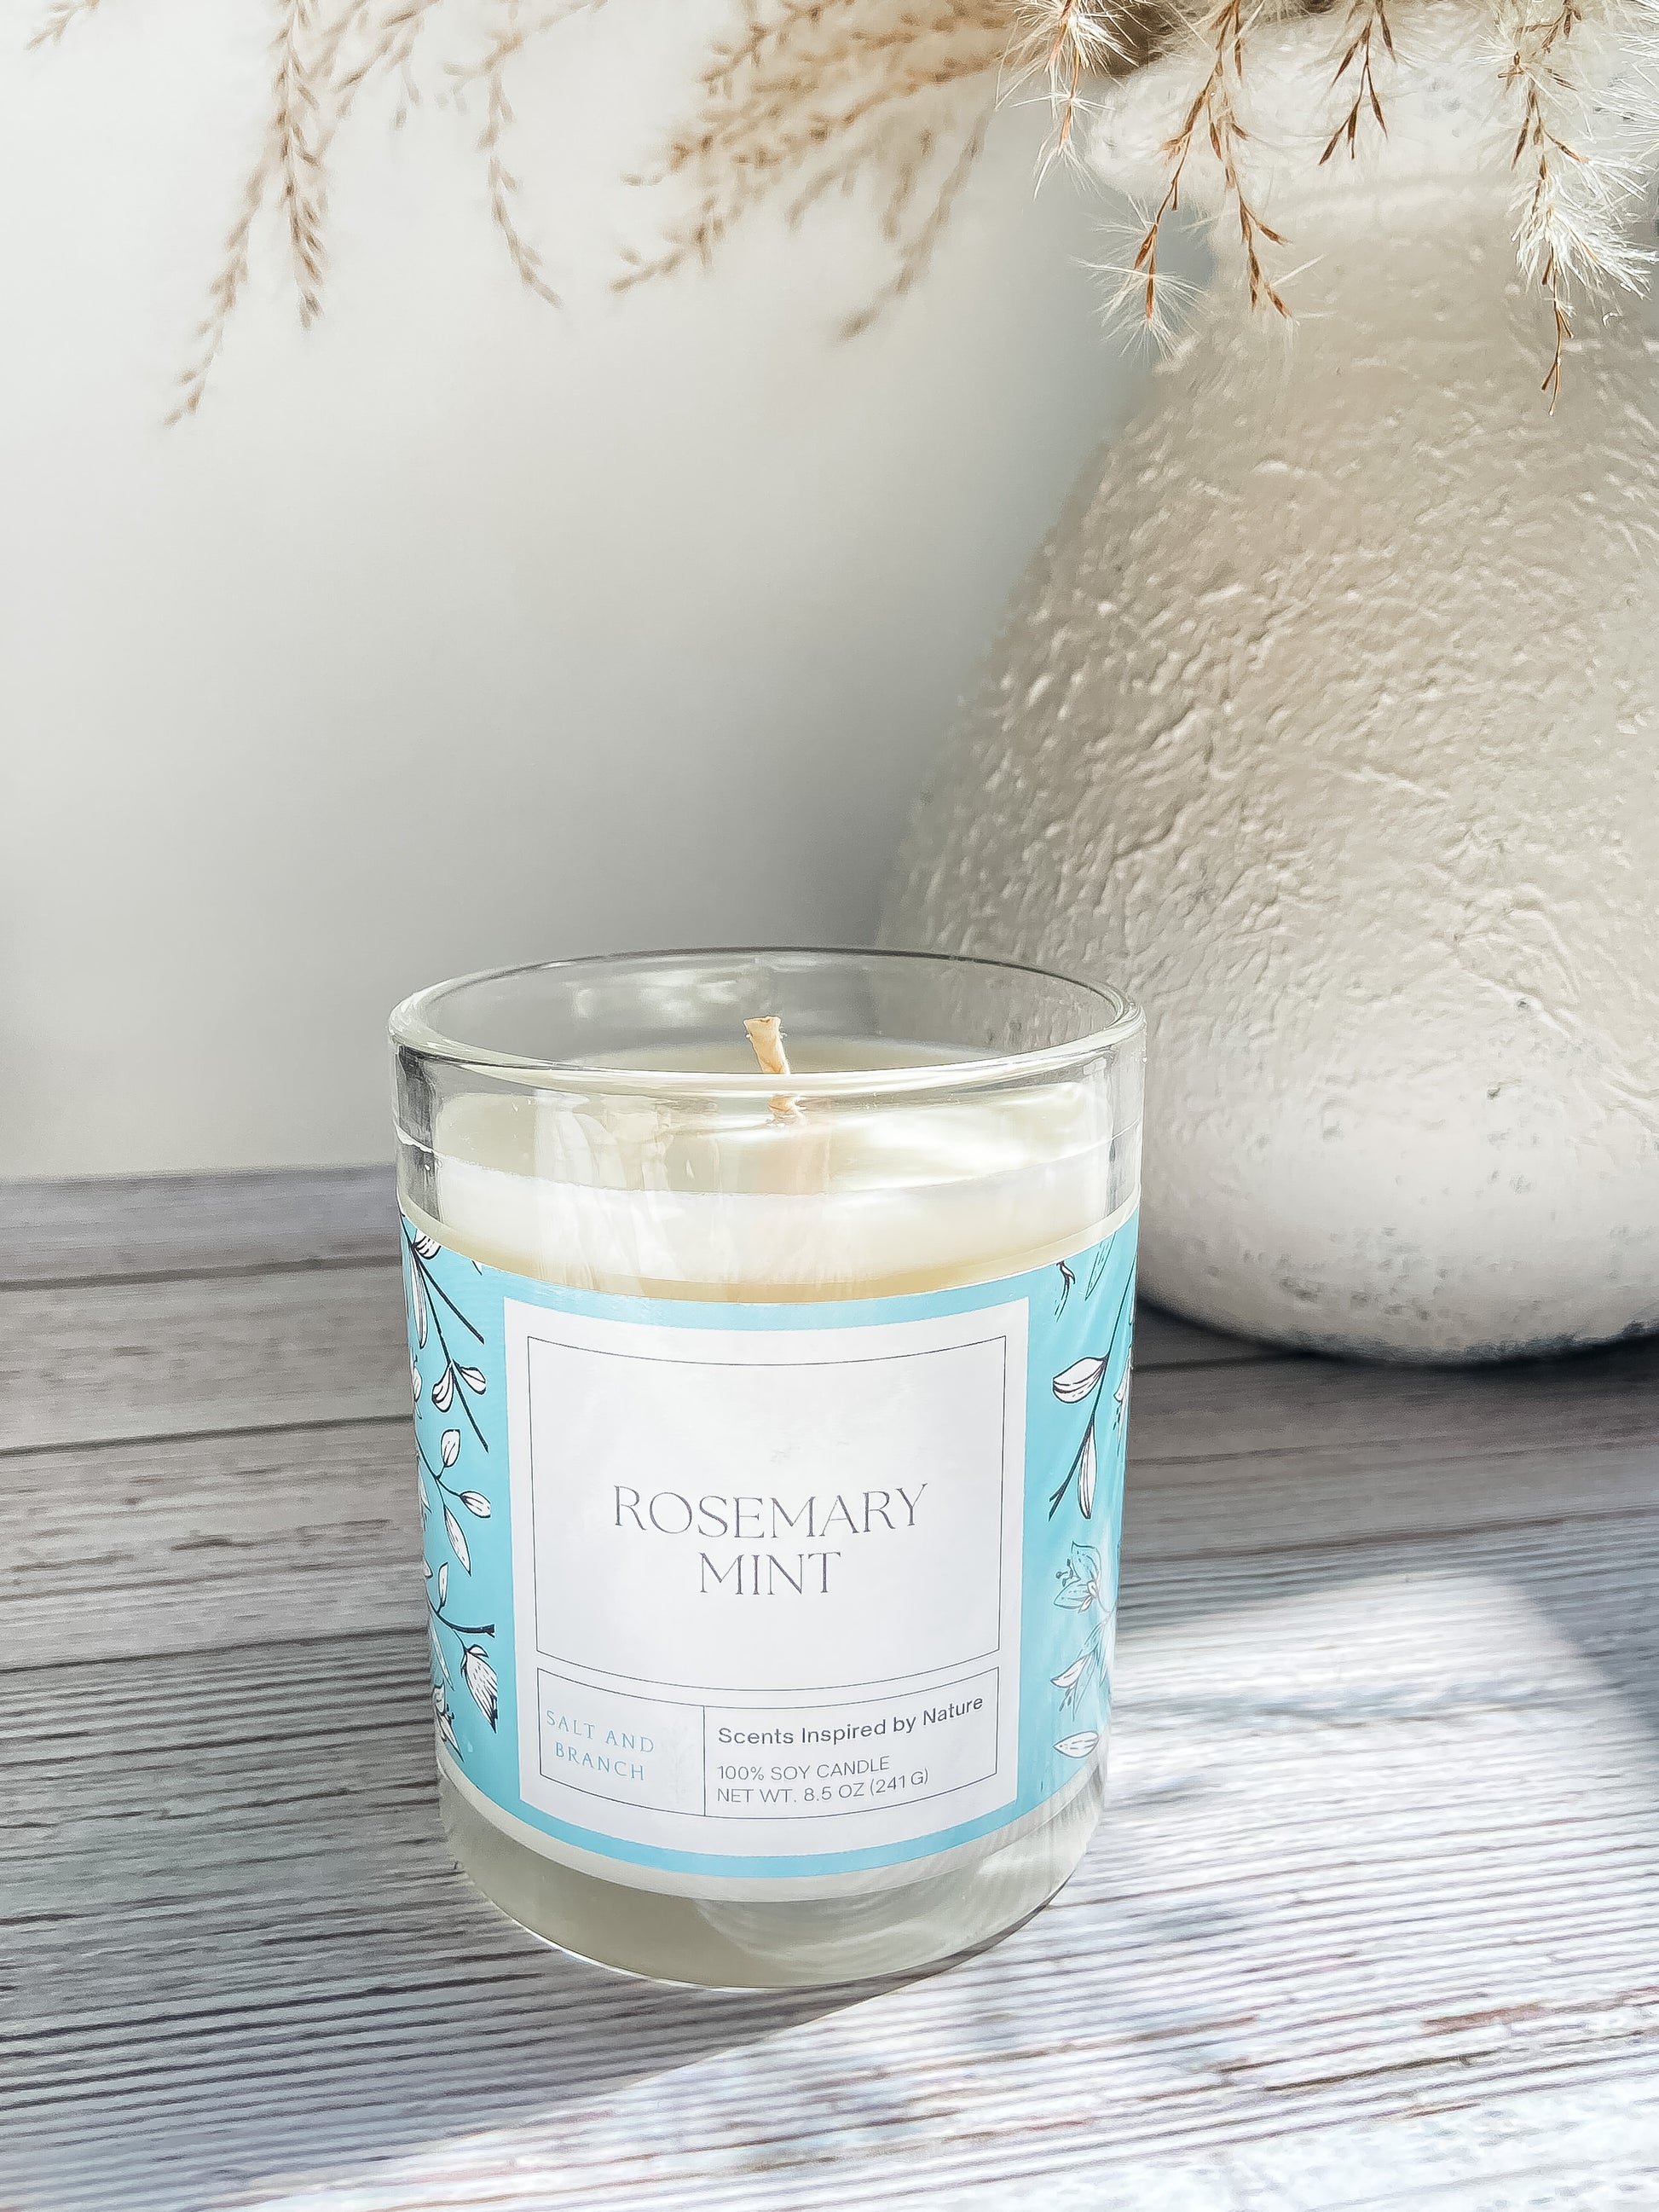 Rosemary Mint Soy Candle - Salt and Branch